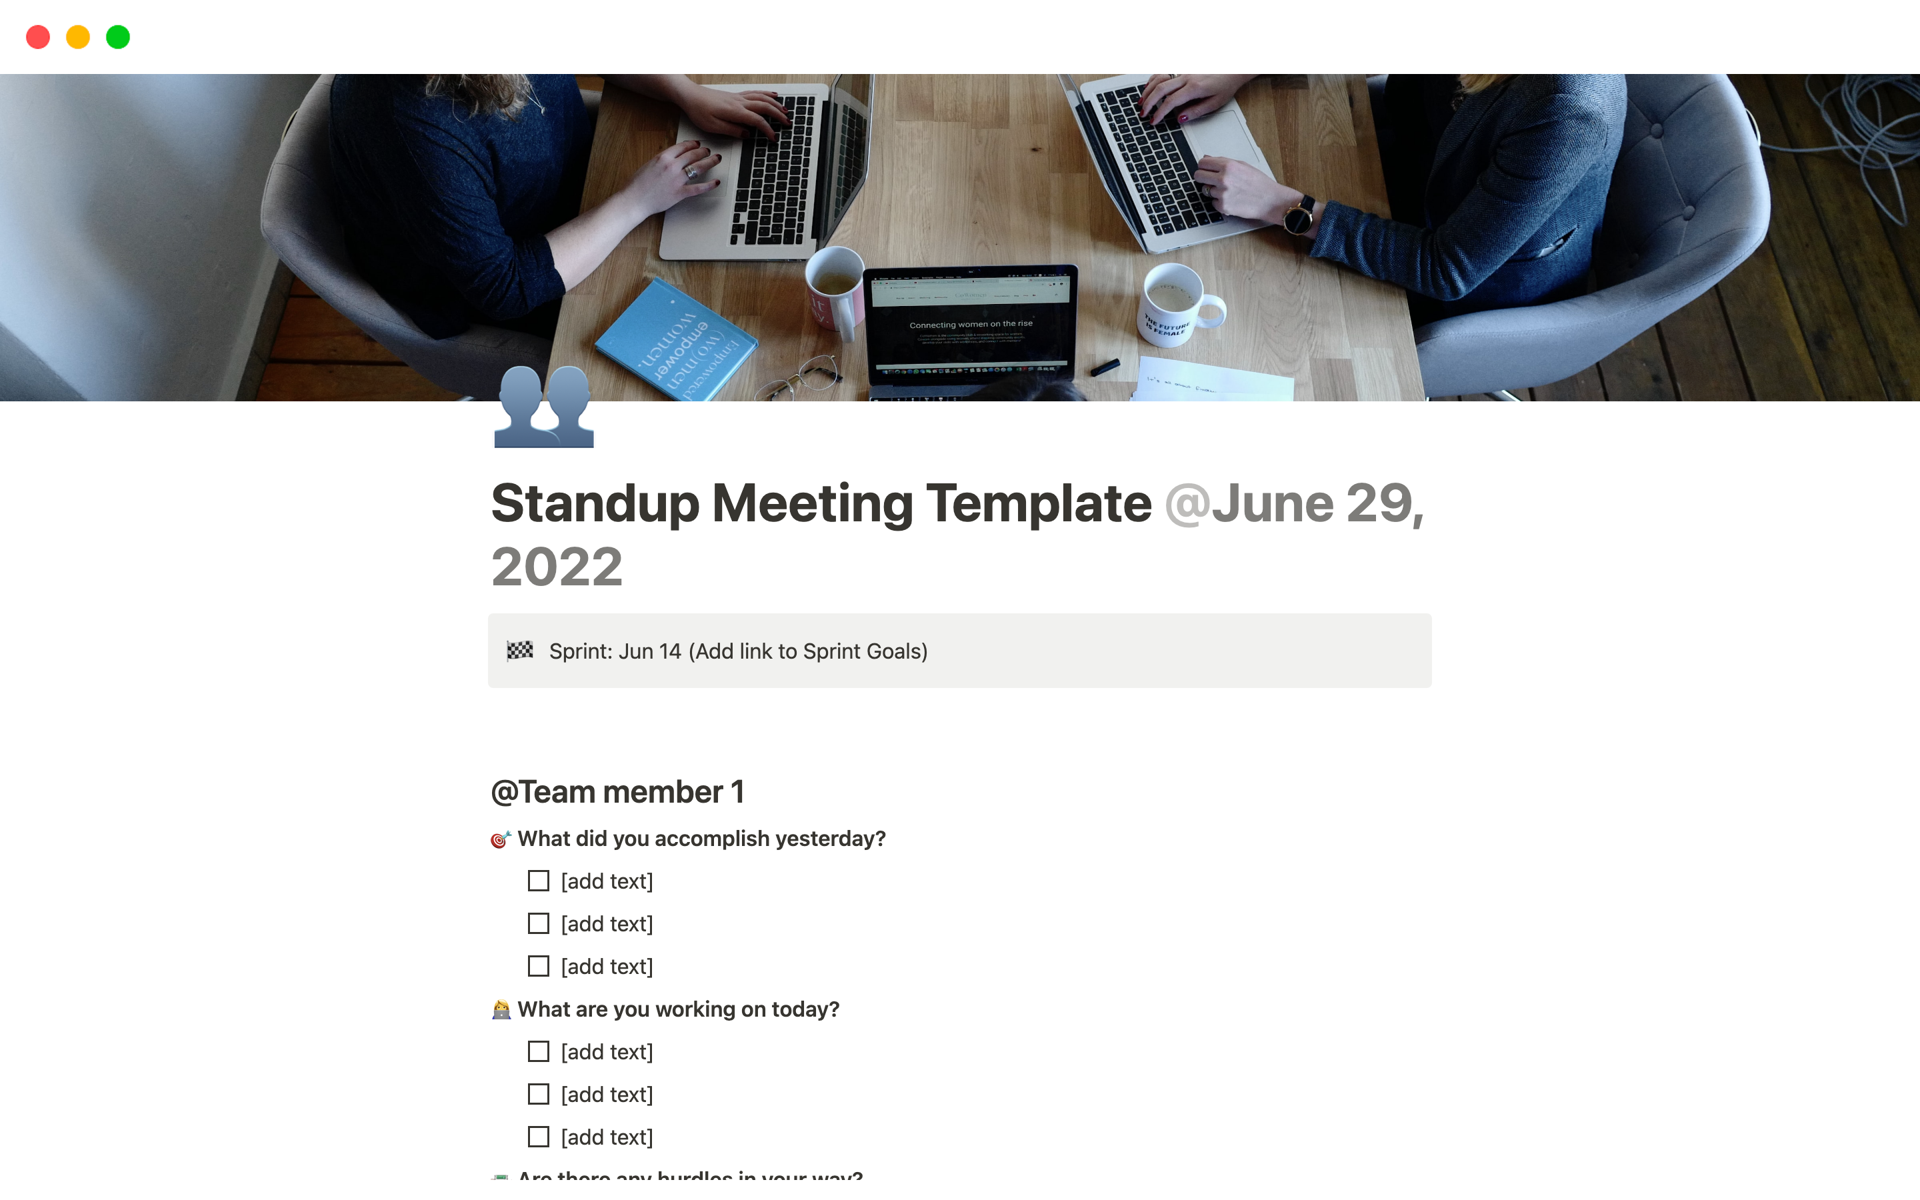 Optimize standup meetings, especially for remote teams.